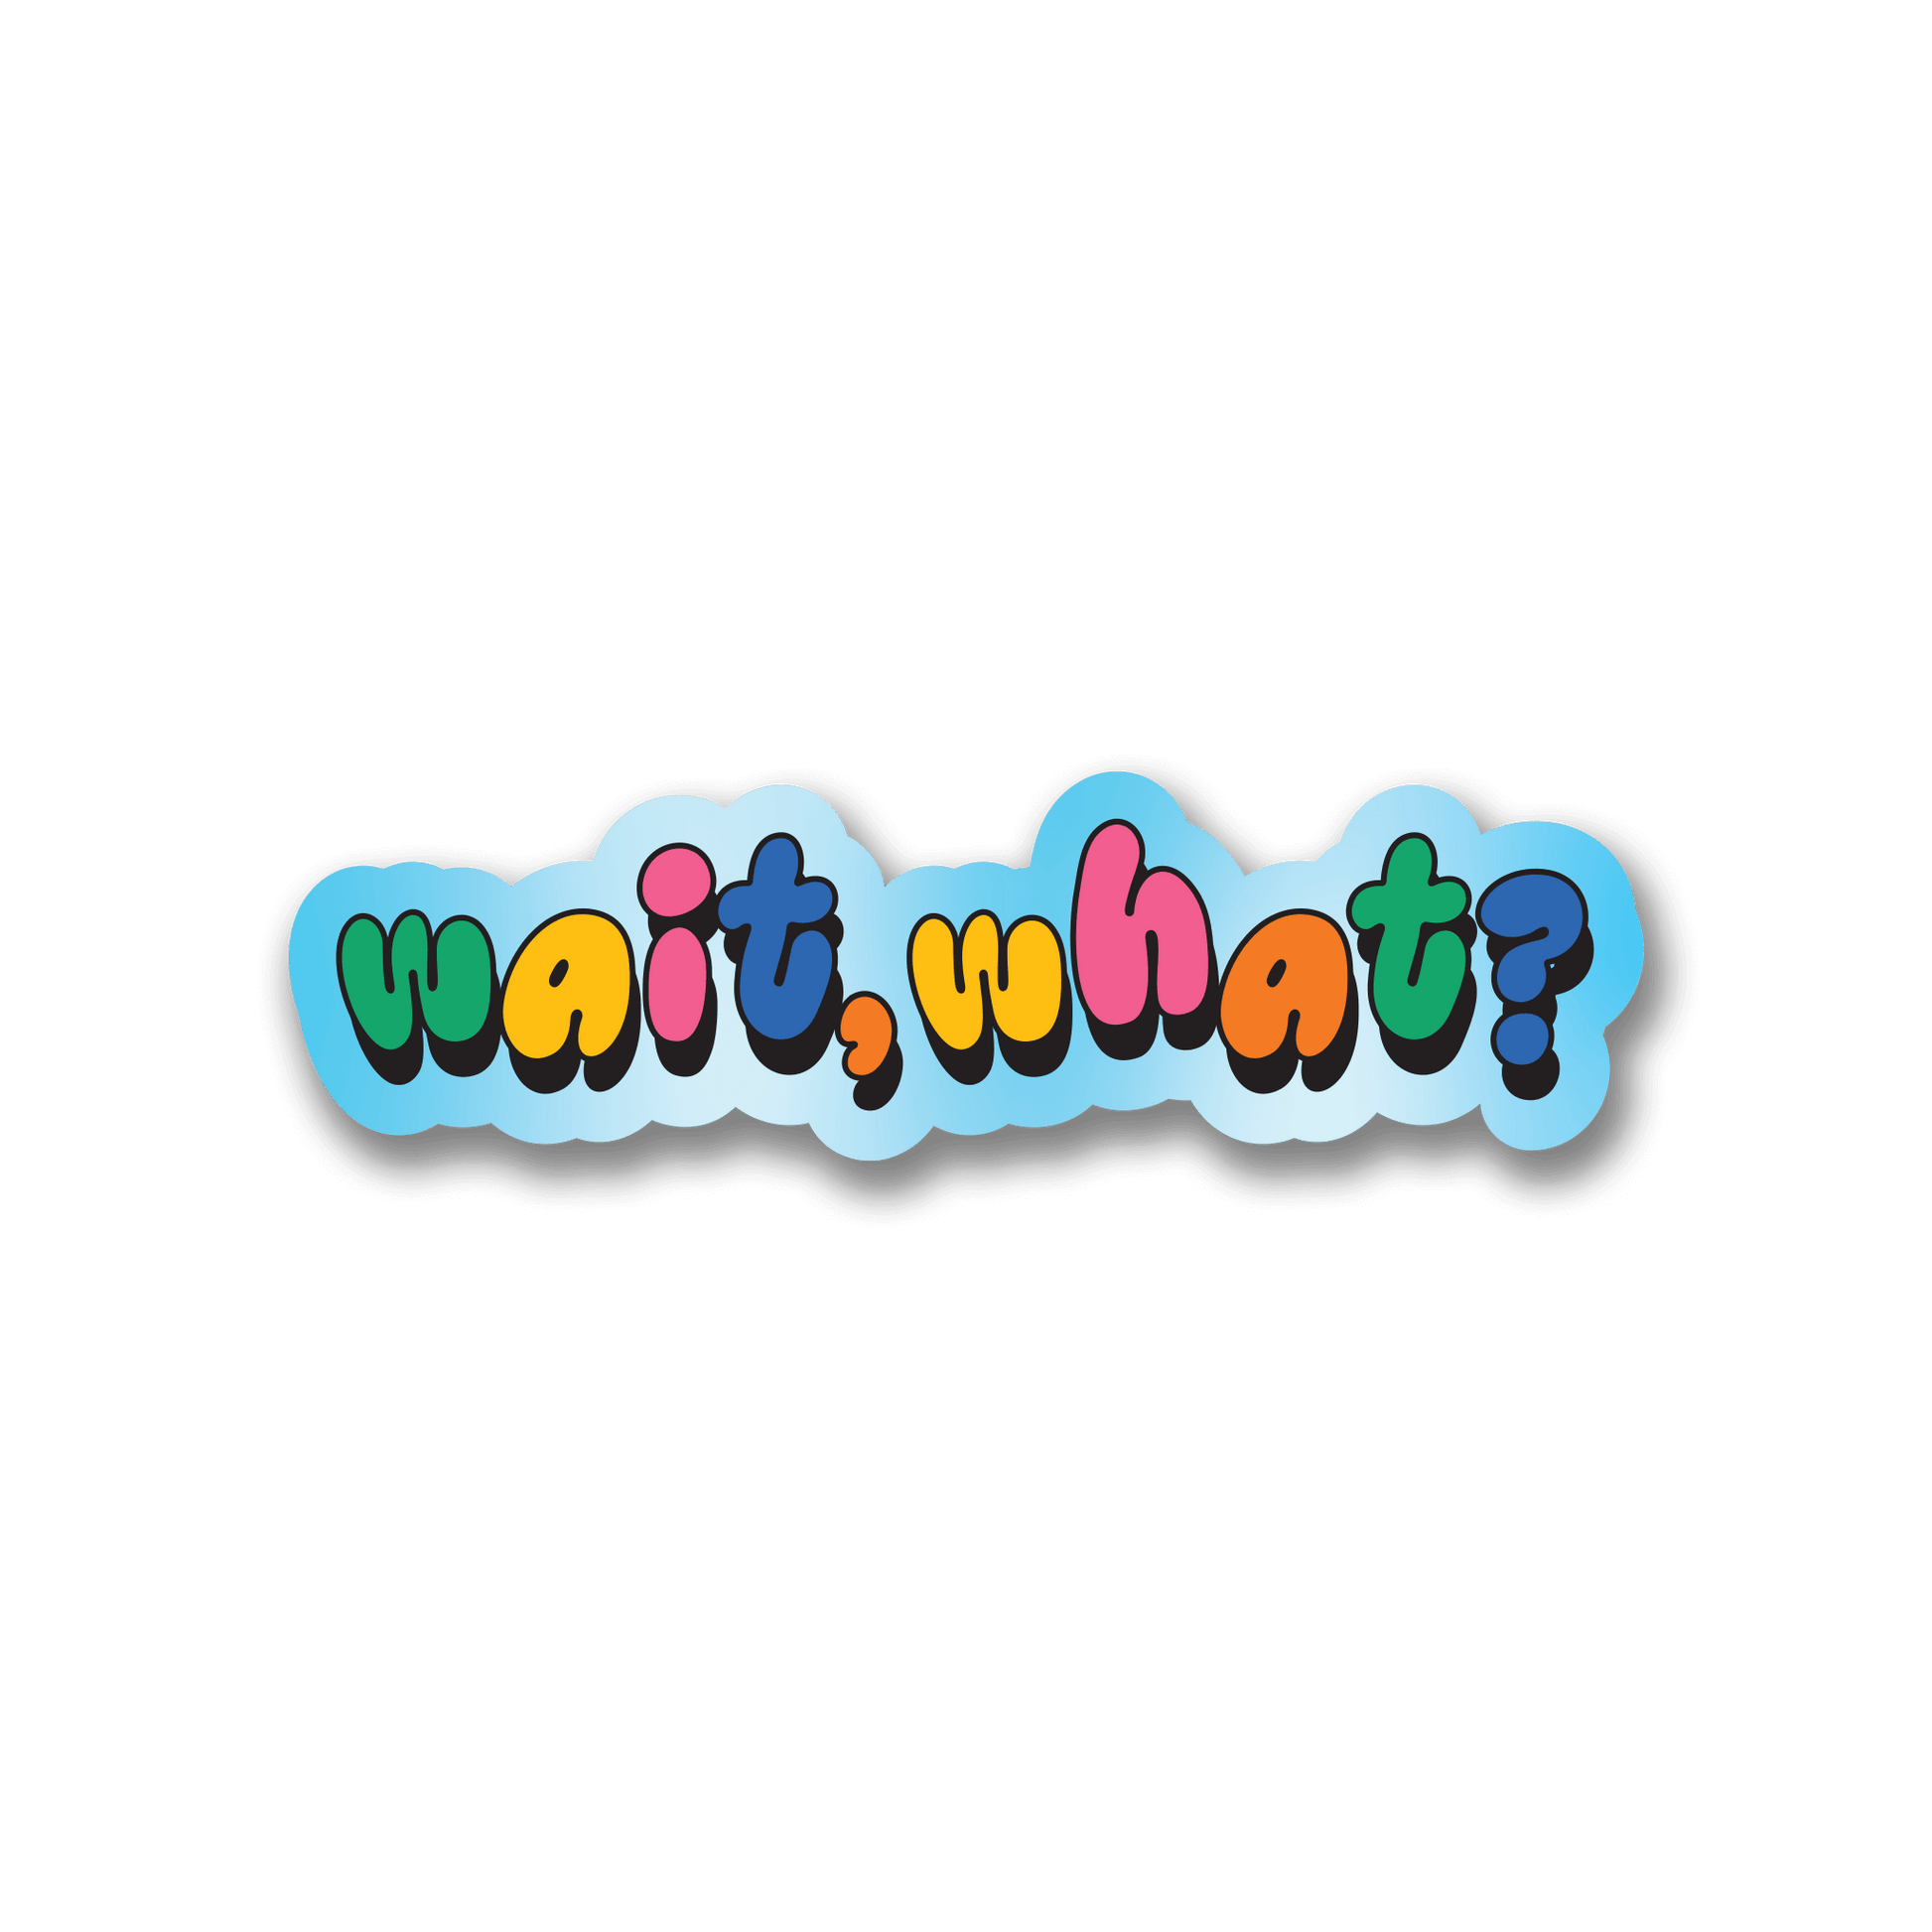 sticker with Colorful text "wait, what?" with a playful font and bubble-like outlines on a black background.